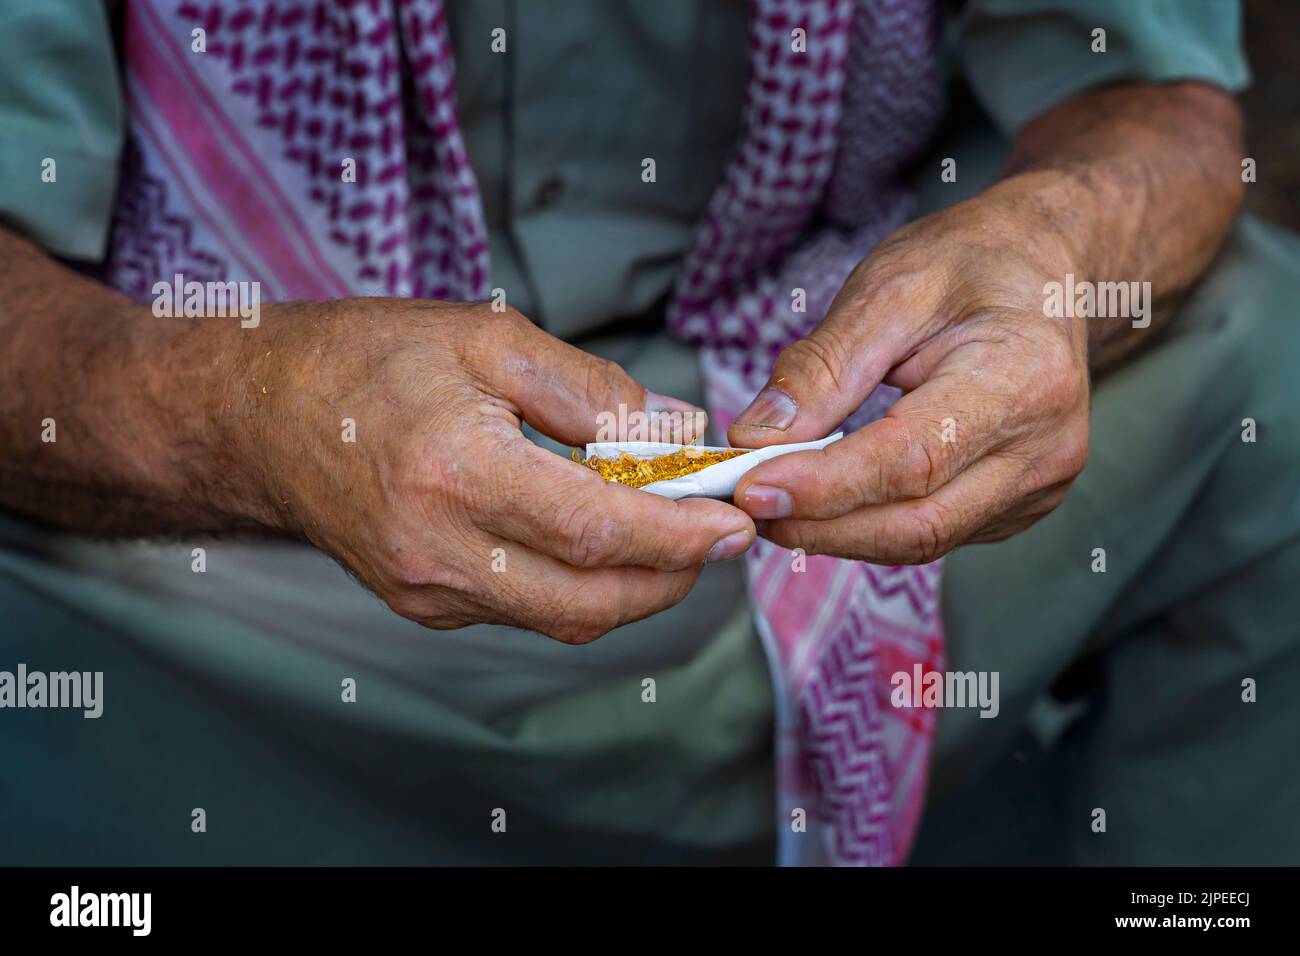 Hands rolling cigarette in the Southeastern Turkey Stock Photo